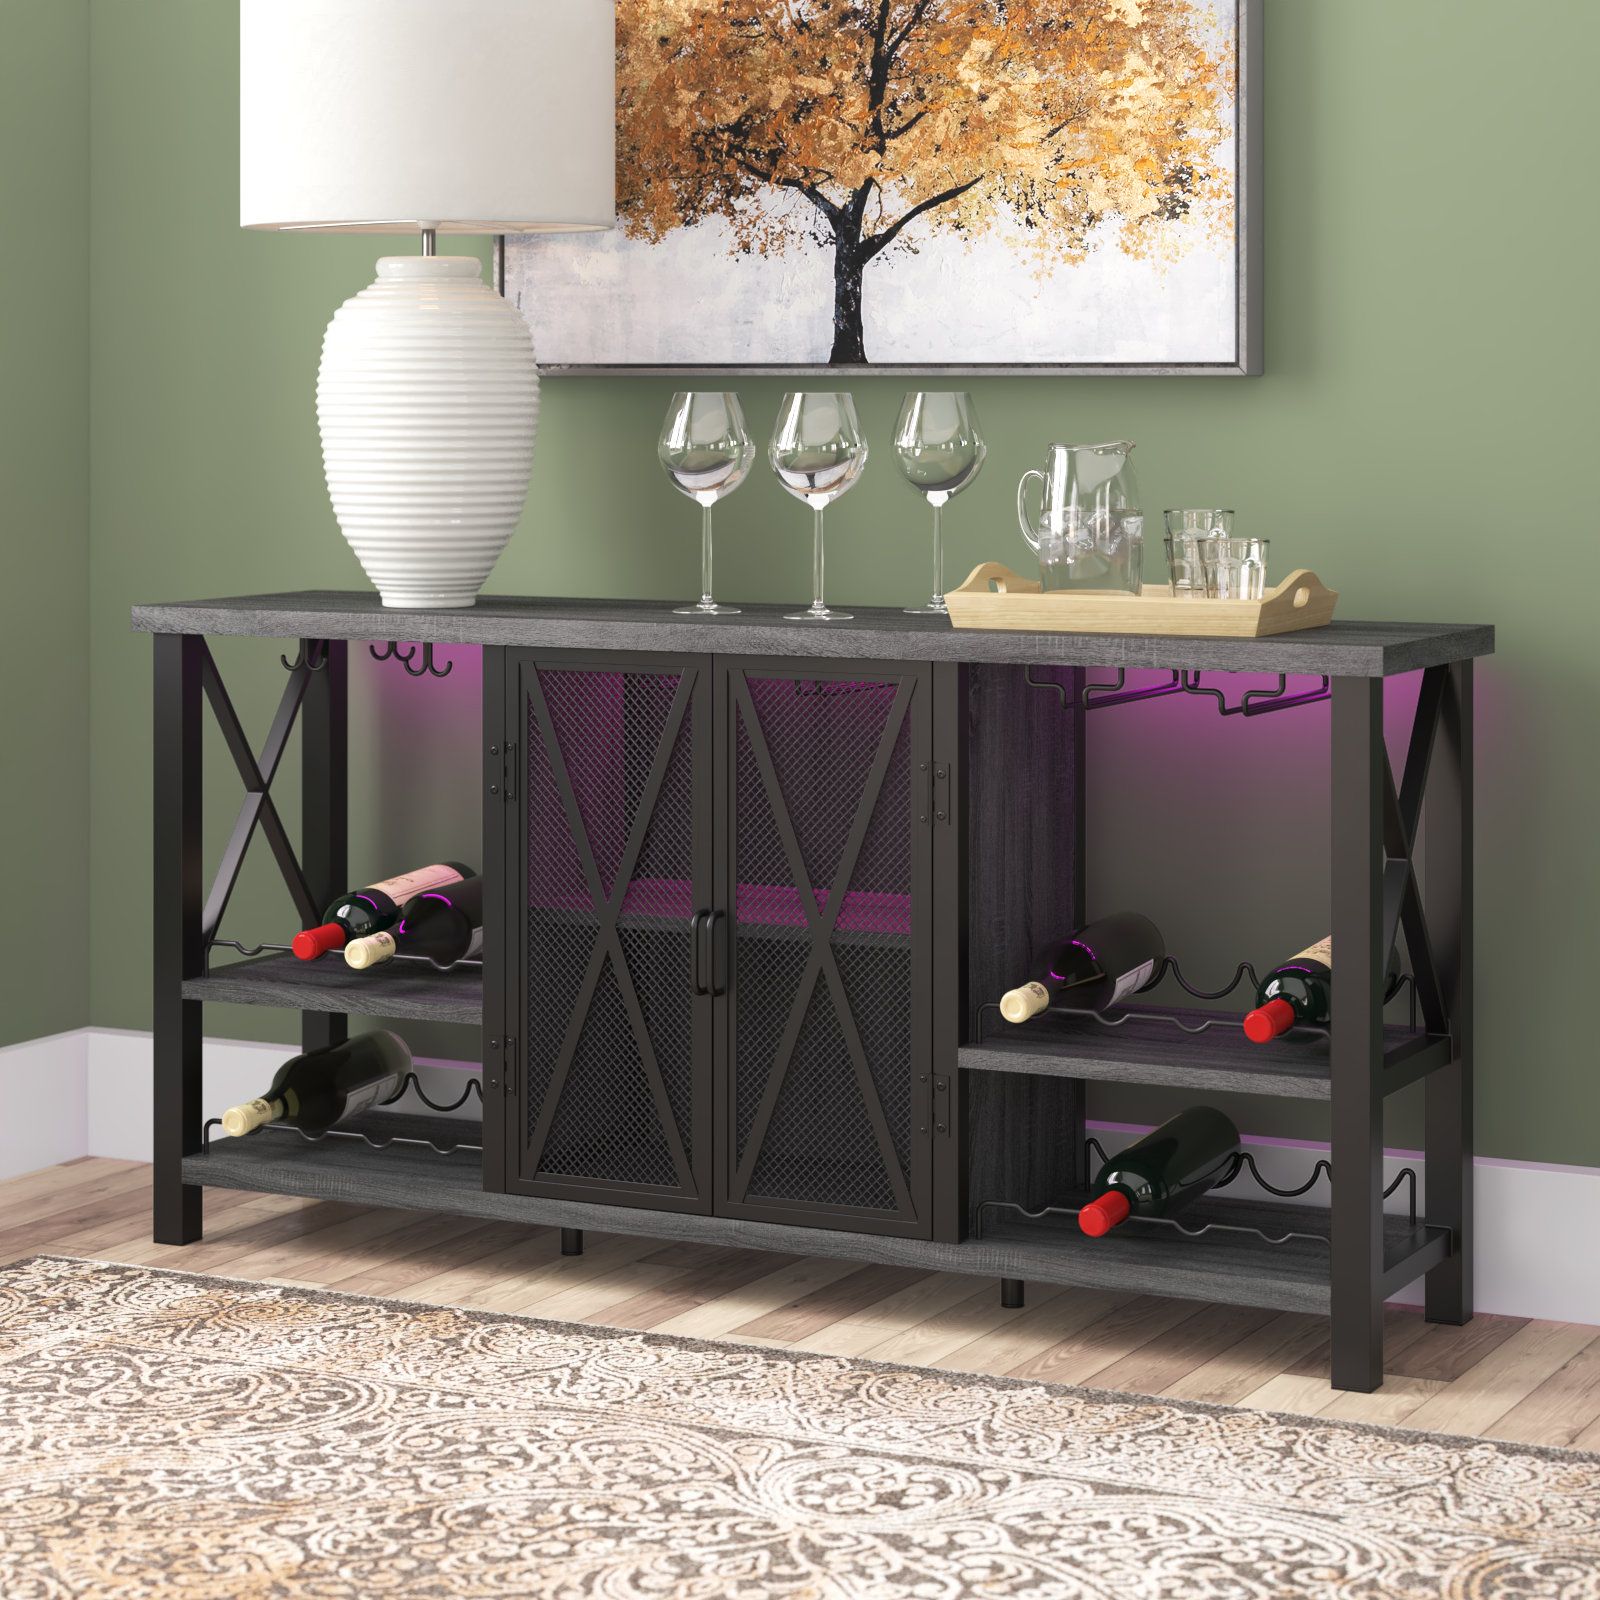 Wade Logan® Sideboard With Led Light And Wine Cabinet & Reviews | Wayfair With Sideboards With Breathable Mesh Doors (Gallery 8 of 20)